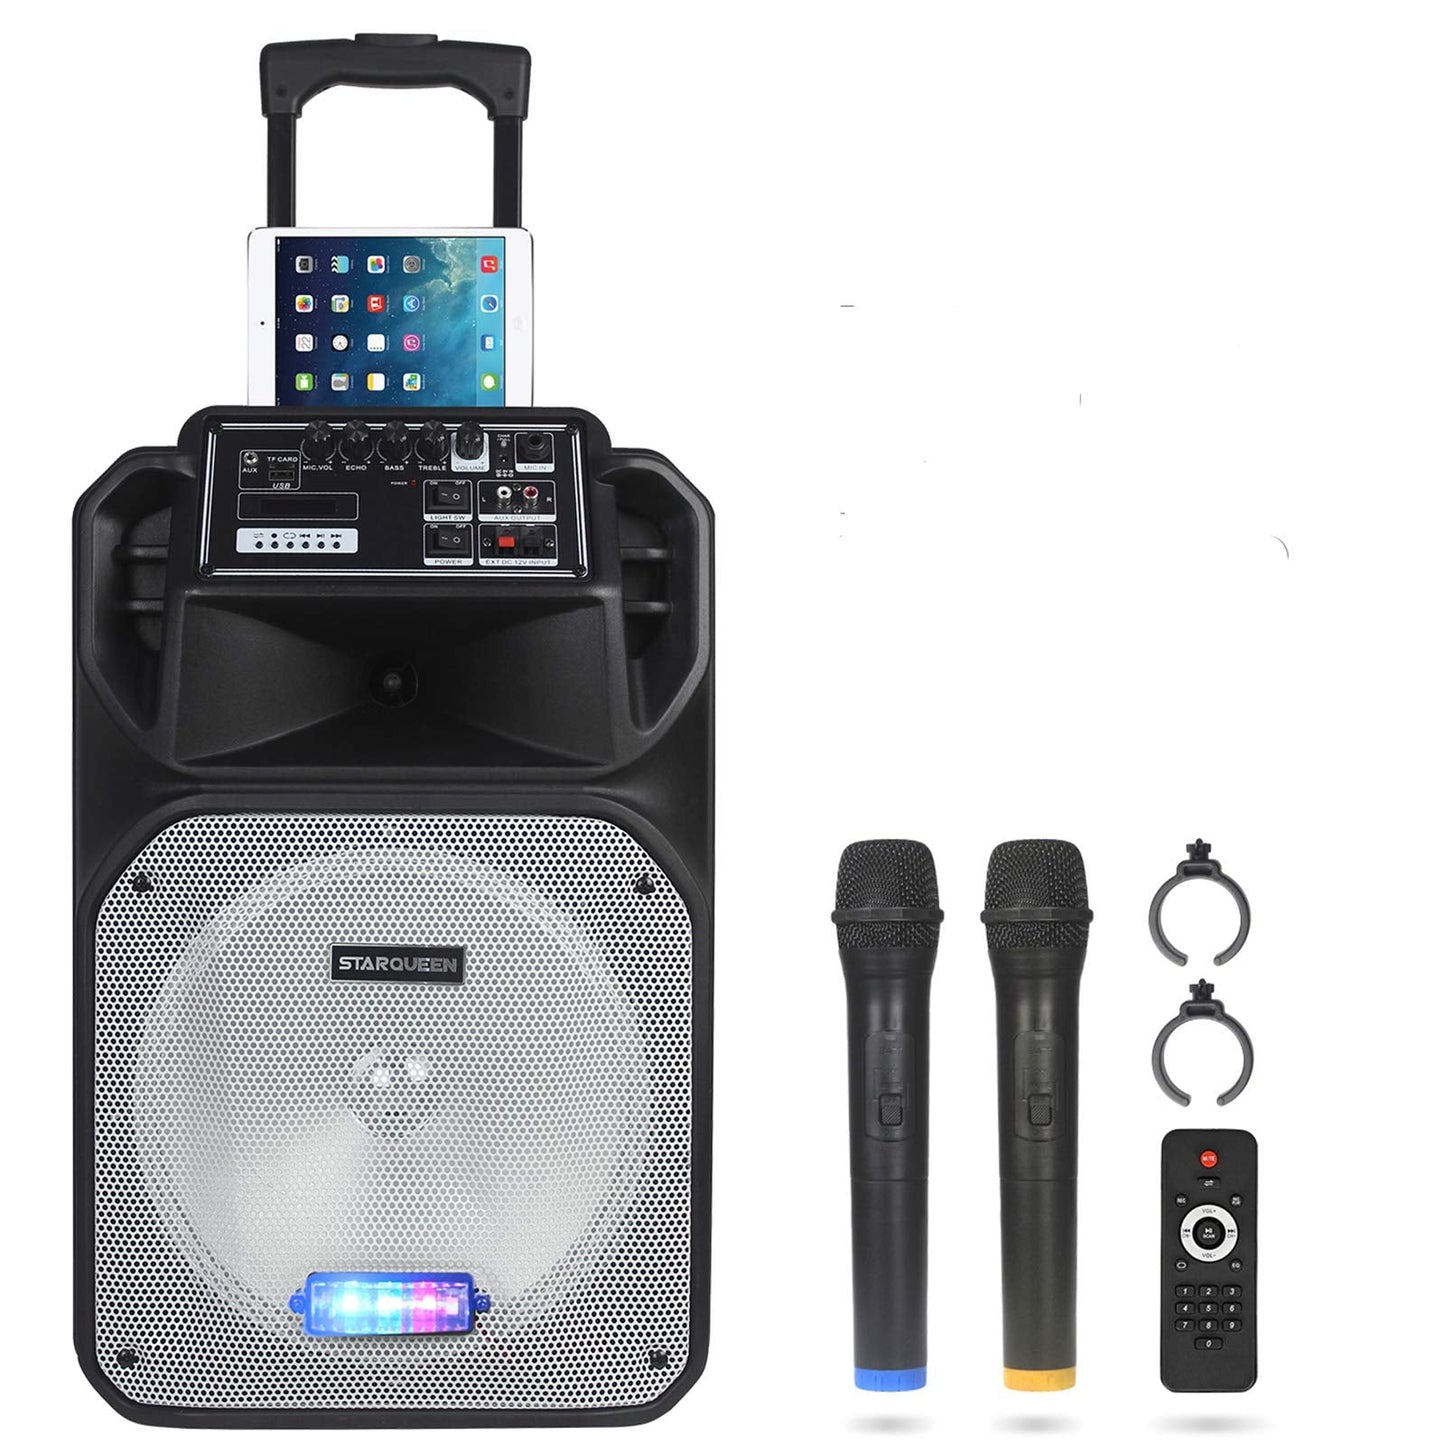 STARQUEEN Karaoke Machine, 160 Watt Peak Power Wireless Connection Karaoke Speaker System-PA Stereo with 12" Subwoofer, DJ Lights, Rechargeable Battery,2 Microphone, Recording, MP3/USB/SD - Home Decor Gifts and More